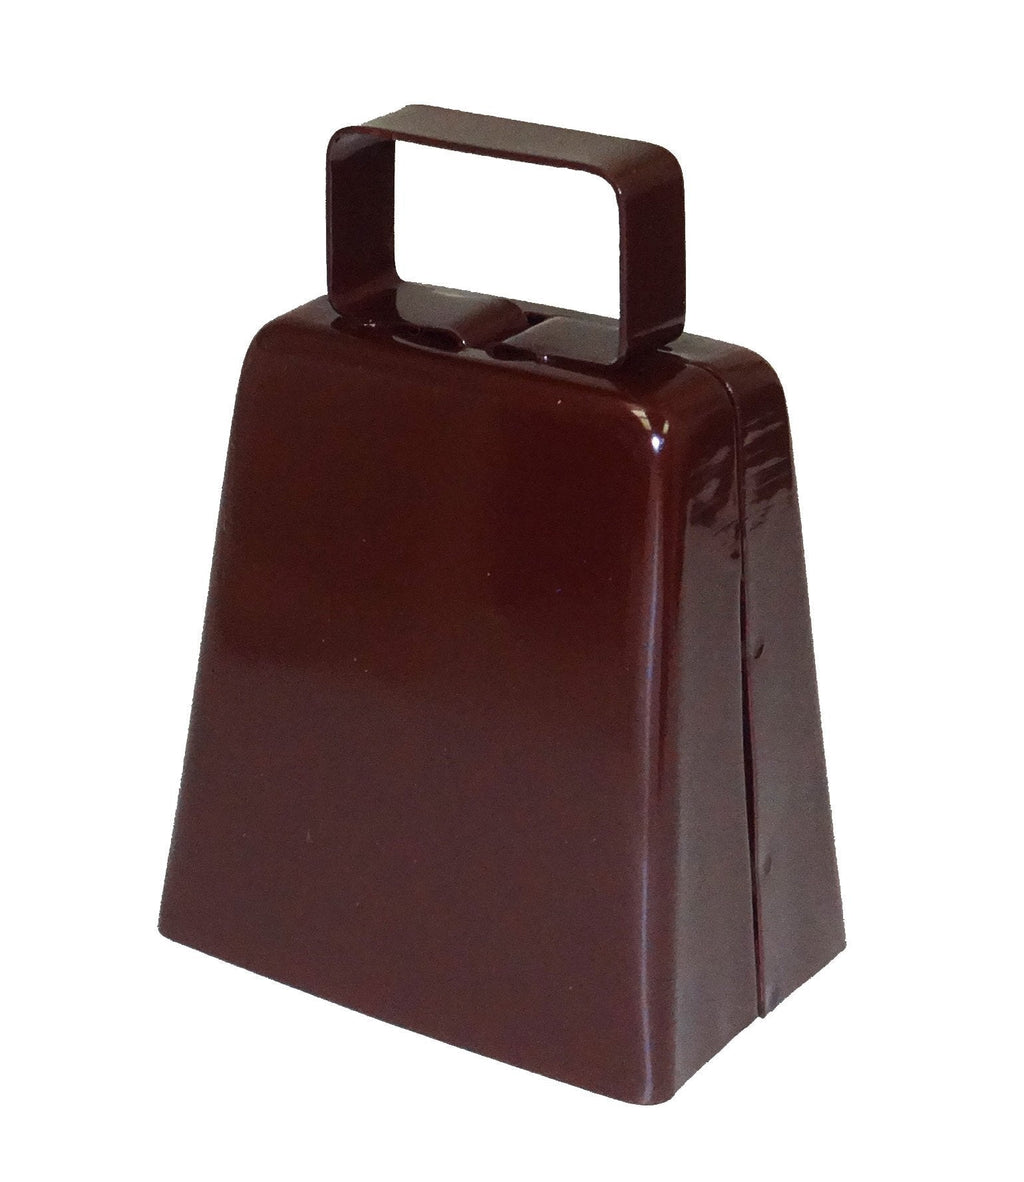 ACI PARTY AND SPIRIT ACCESSORIES 236890 BURGUNDY 3" COWBELL Metal Cowbell, Burgundy